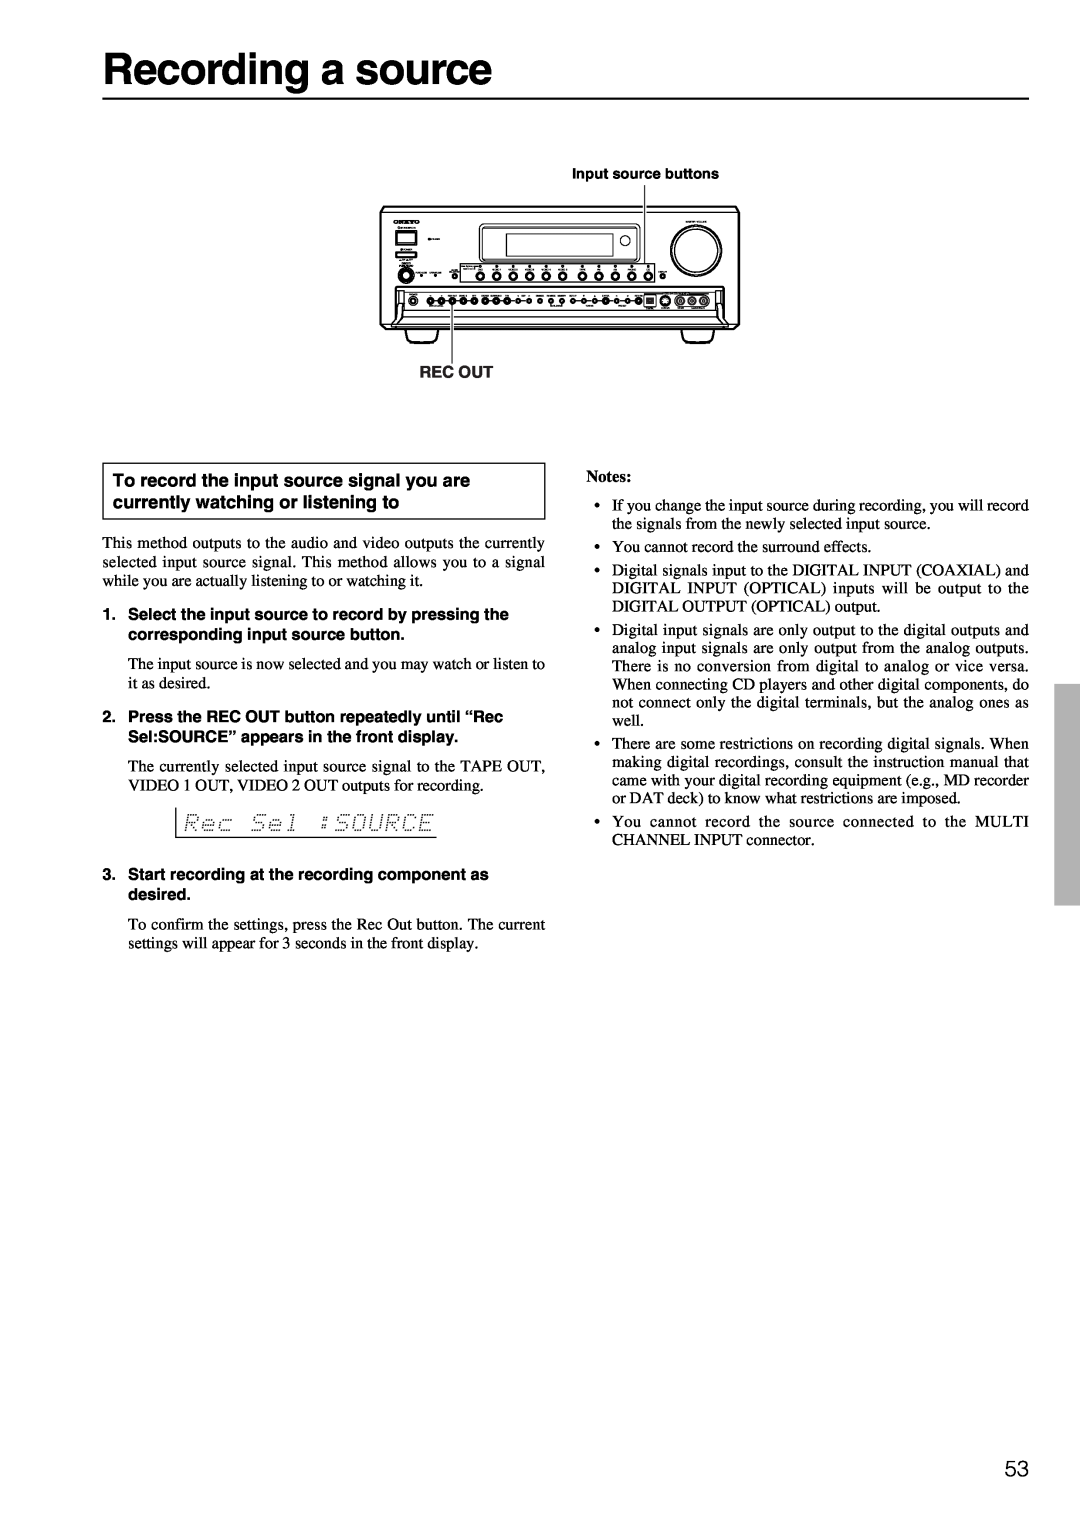 Onkyo TX-DS898 instruction manual Recording a source 